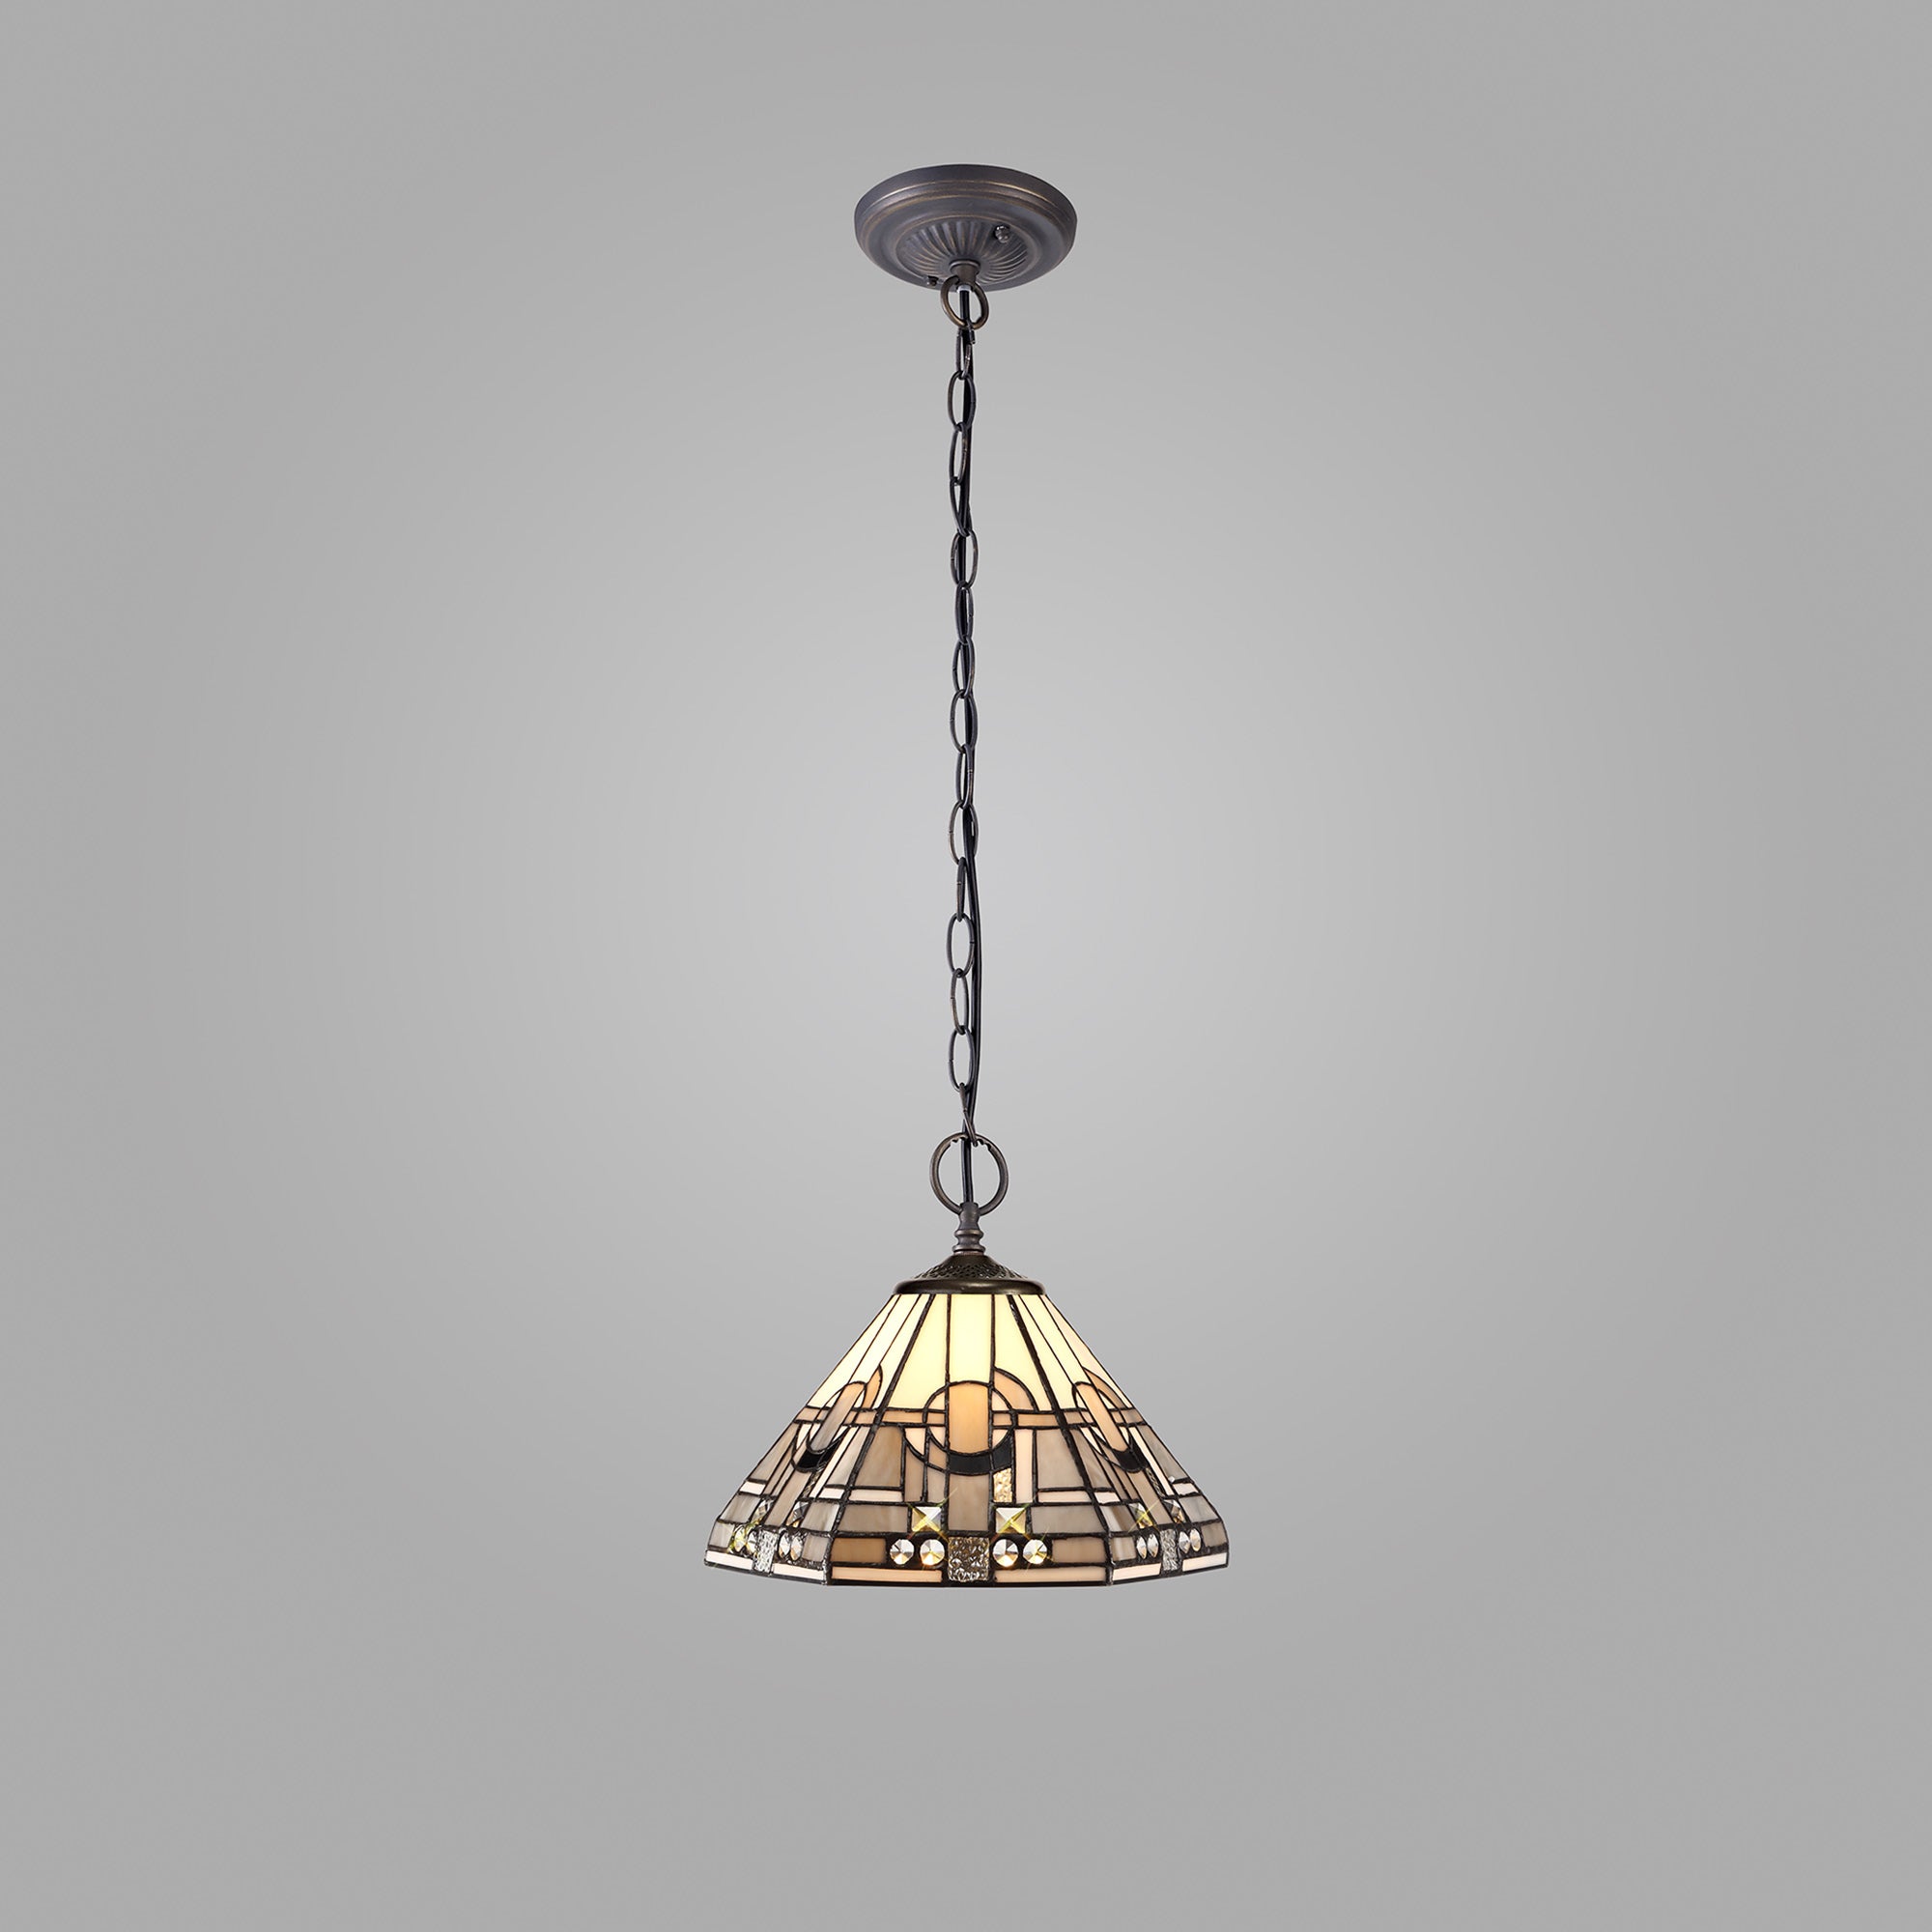 Atek 2 Light Downlighter Pendant E27 With 30cm Tiffany Shade, White/Grey/Black/Clear Crystal/Aged Antique Brass